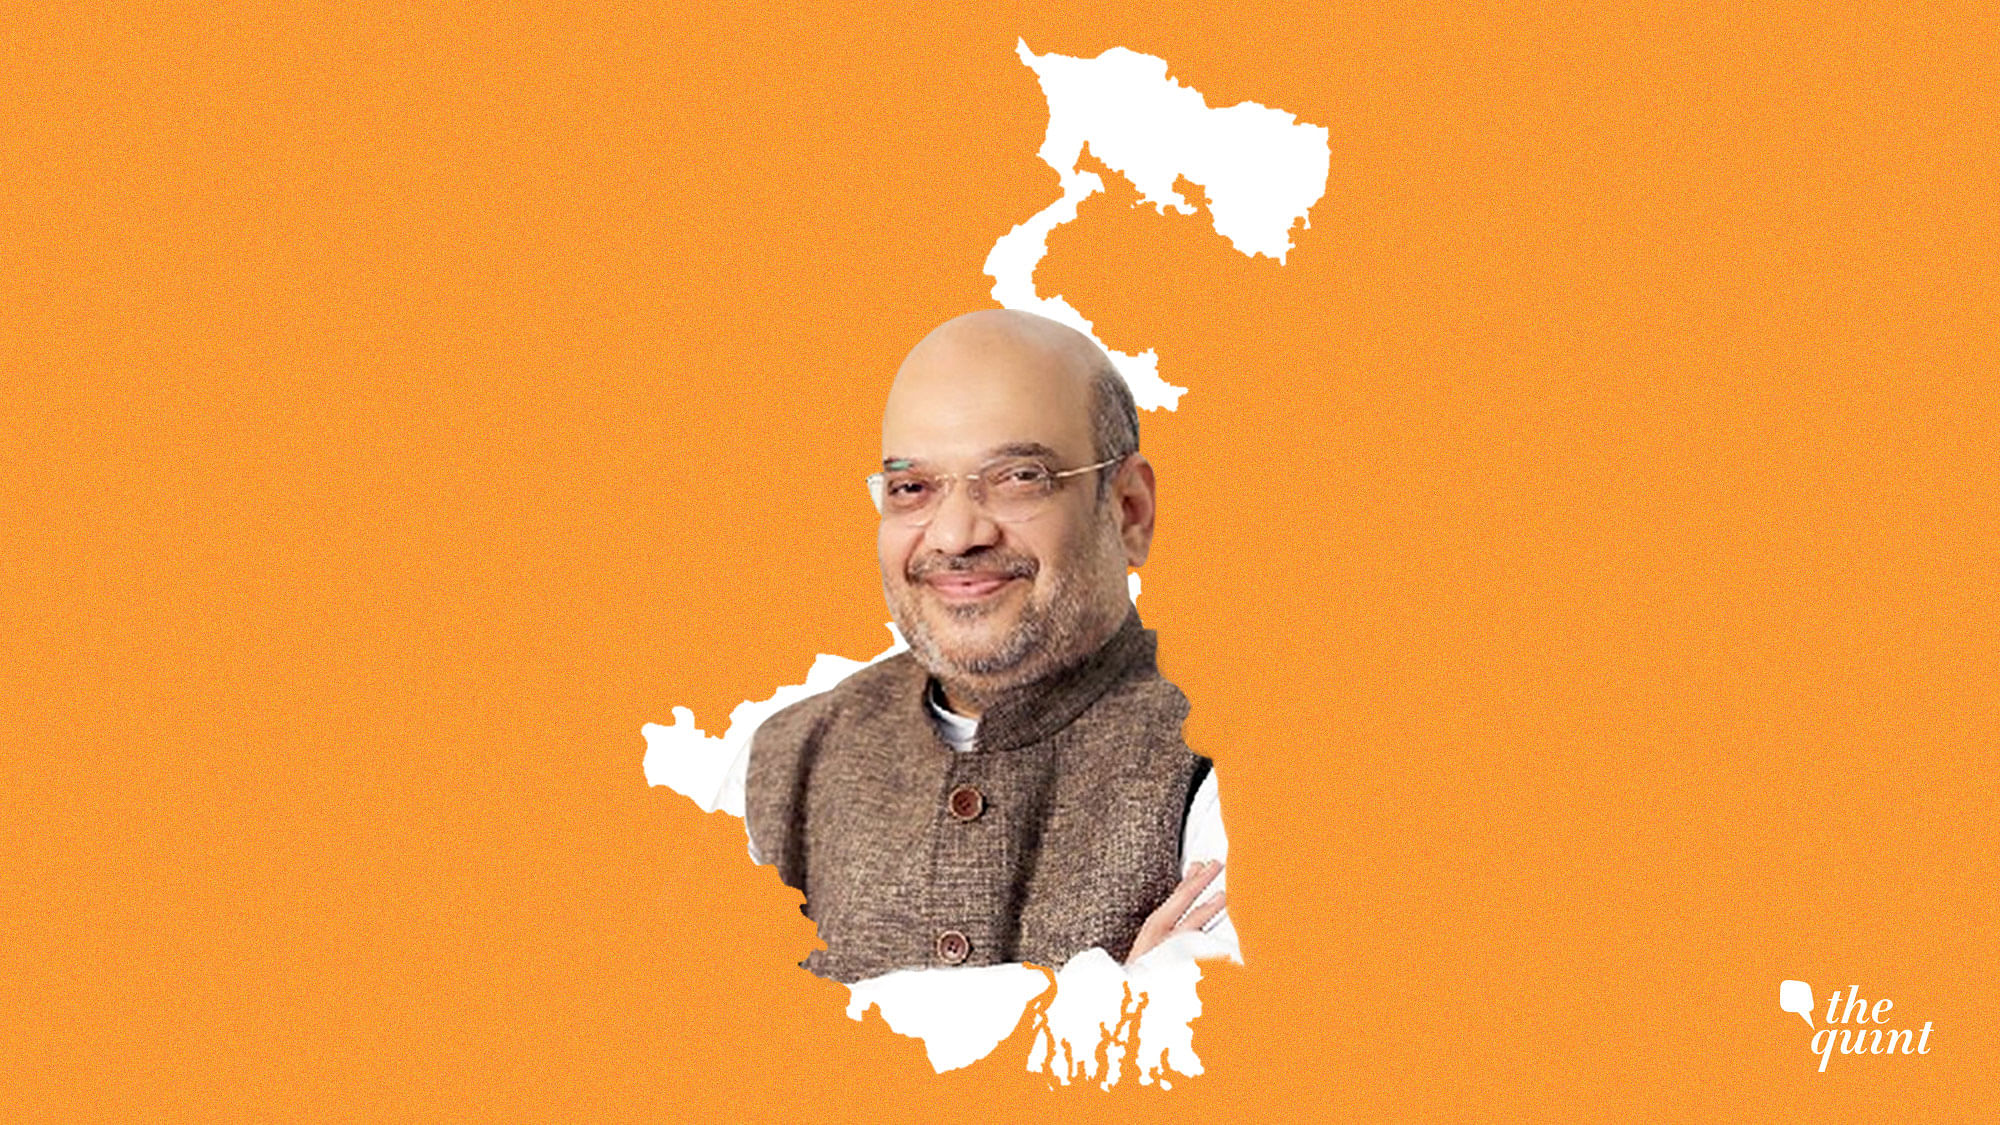 Shah’s visit to WB was not only a strategic move for 2019 general elections but a stepping stone for the BJP in 2020.